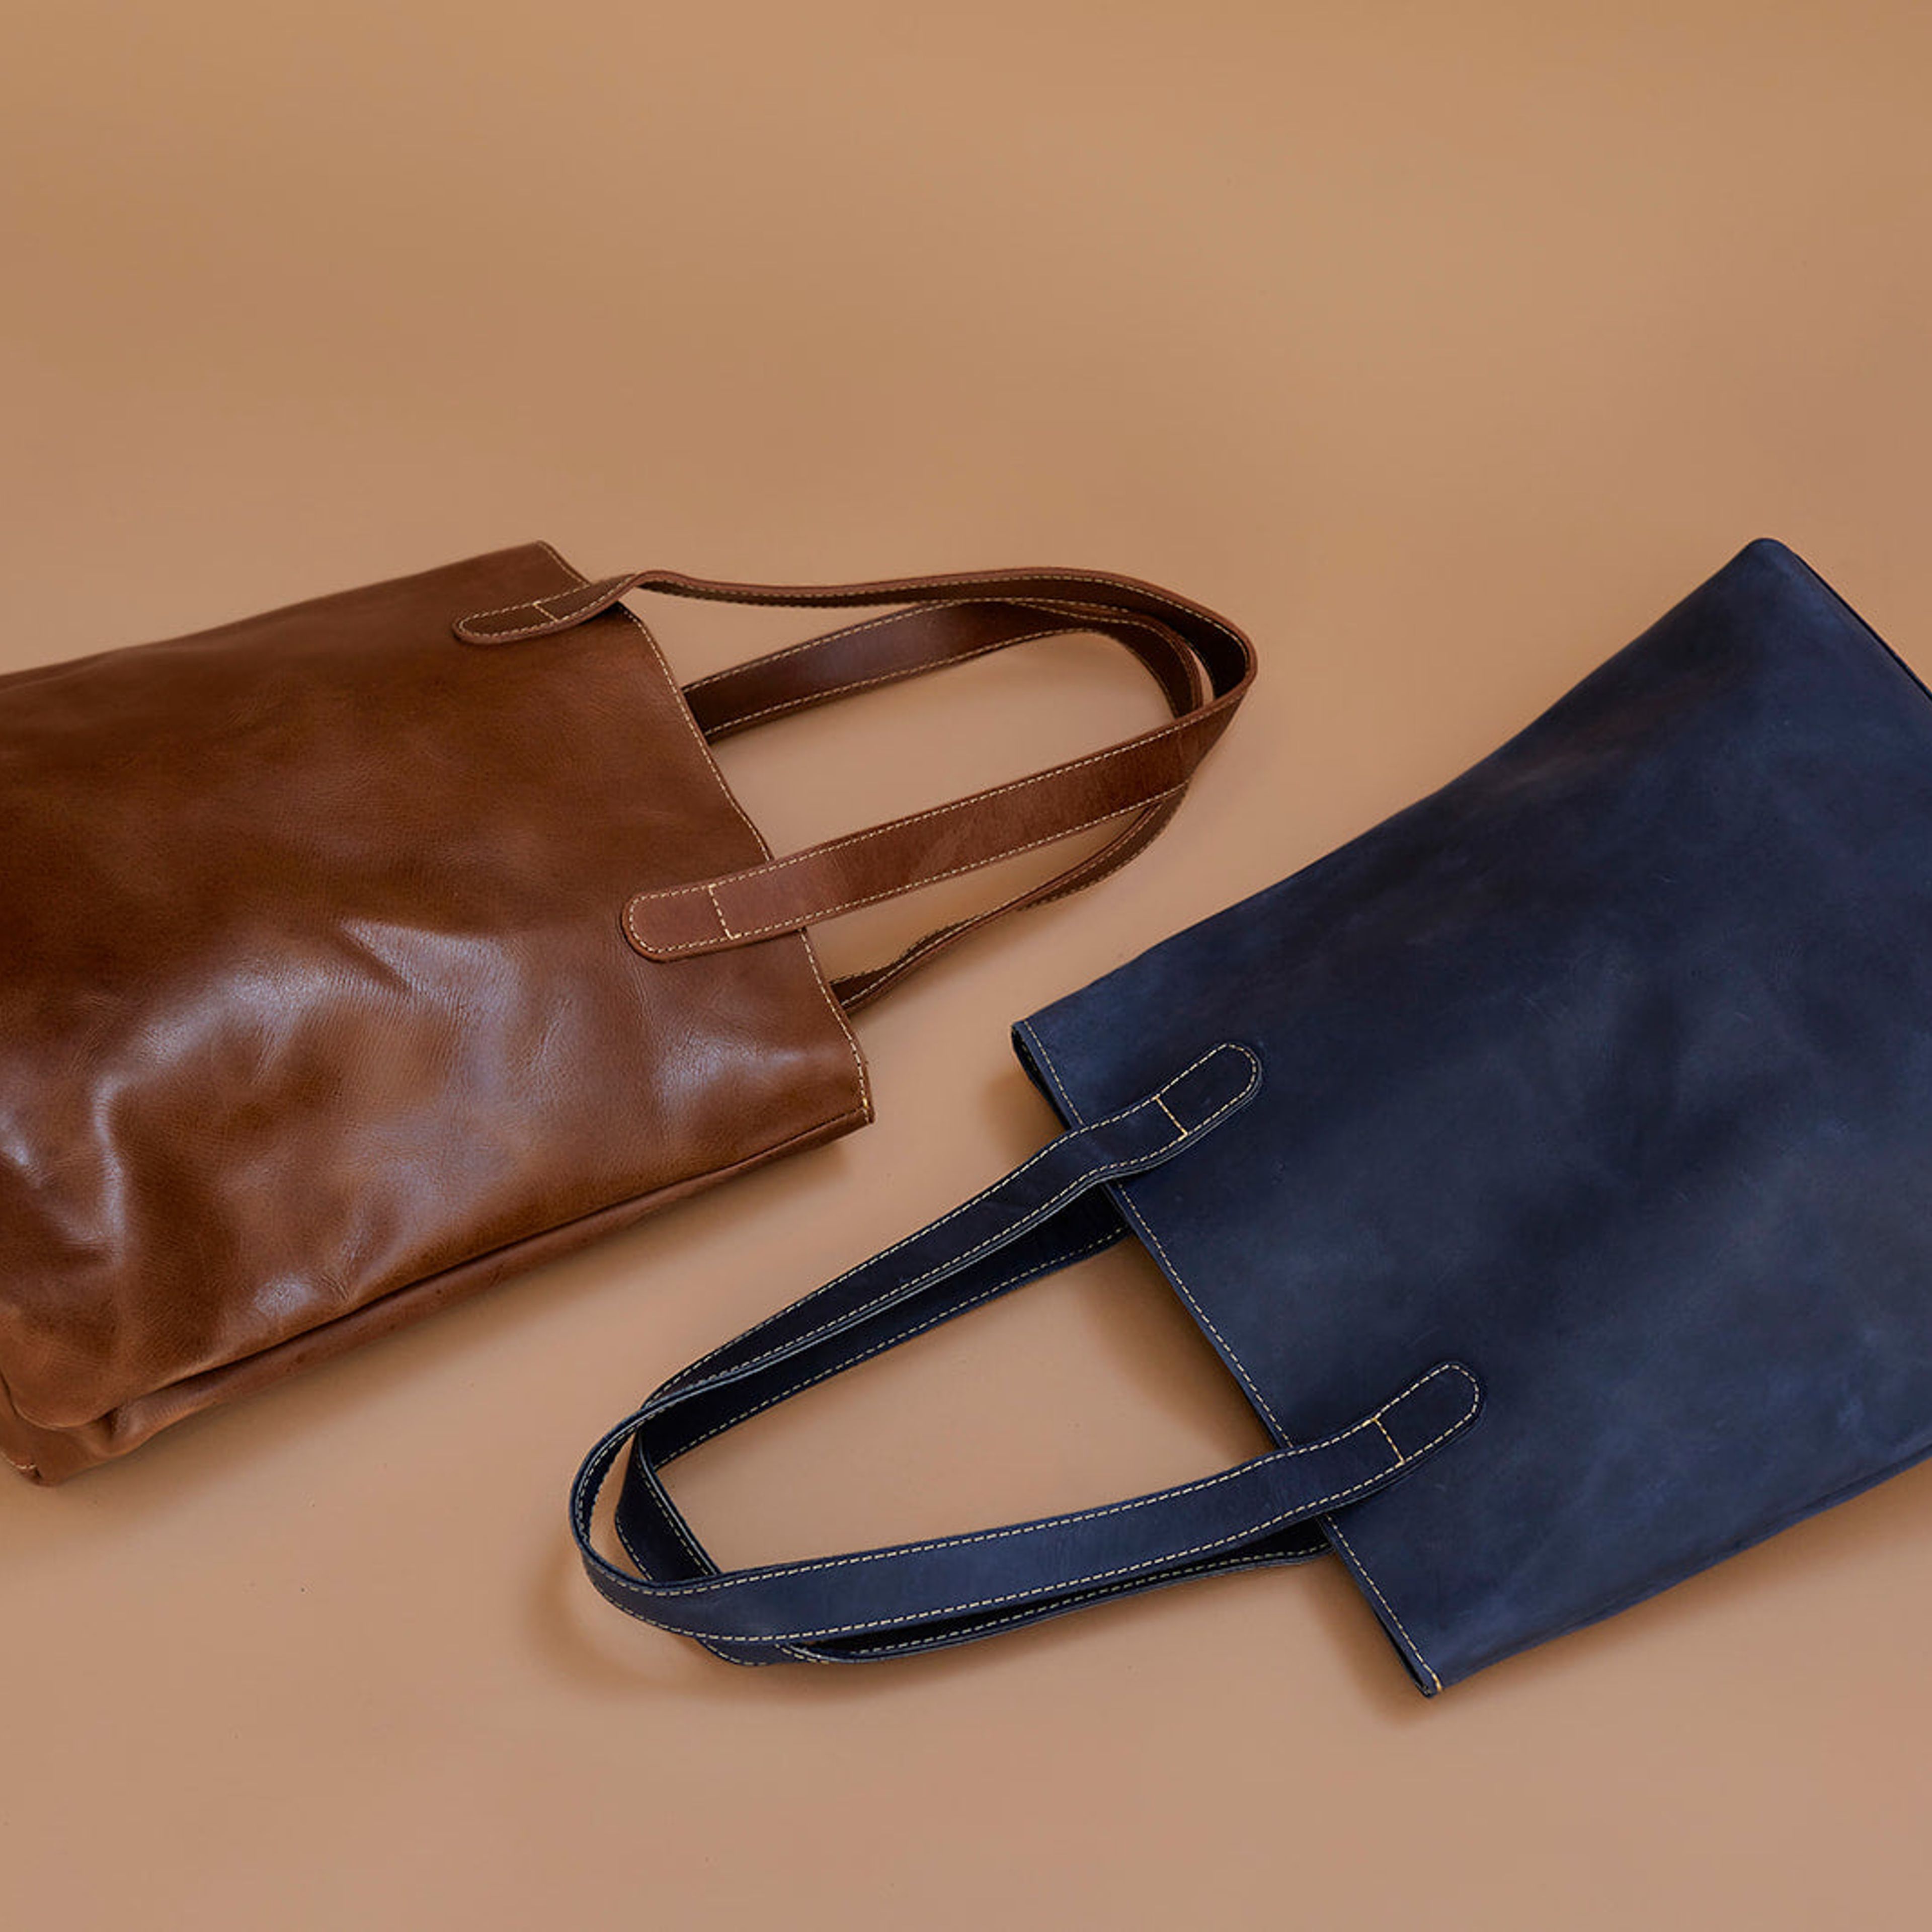 Hanna Leather Tote - Almond Brown